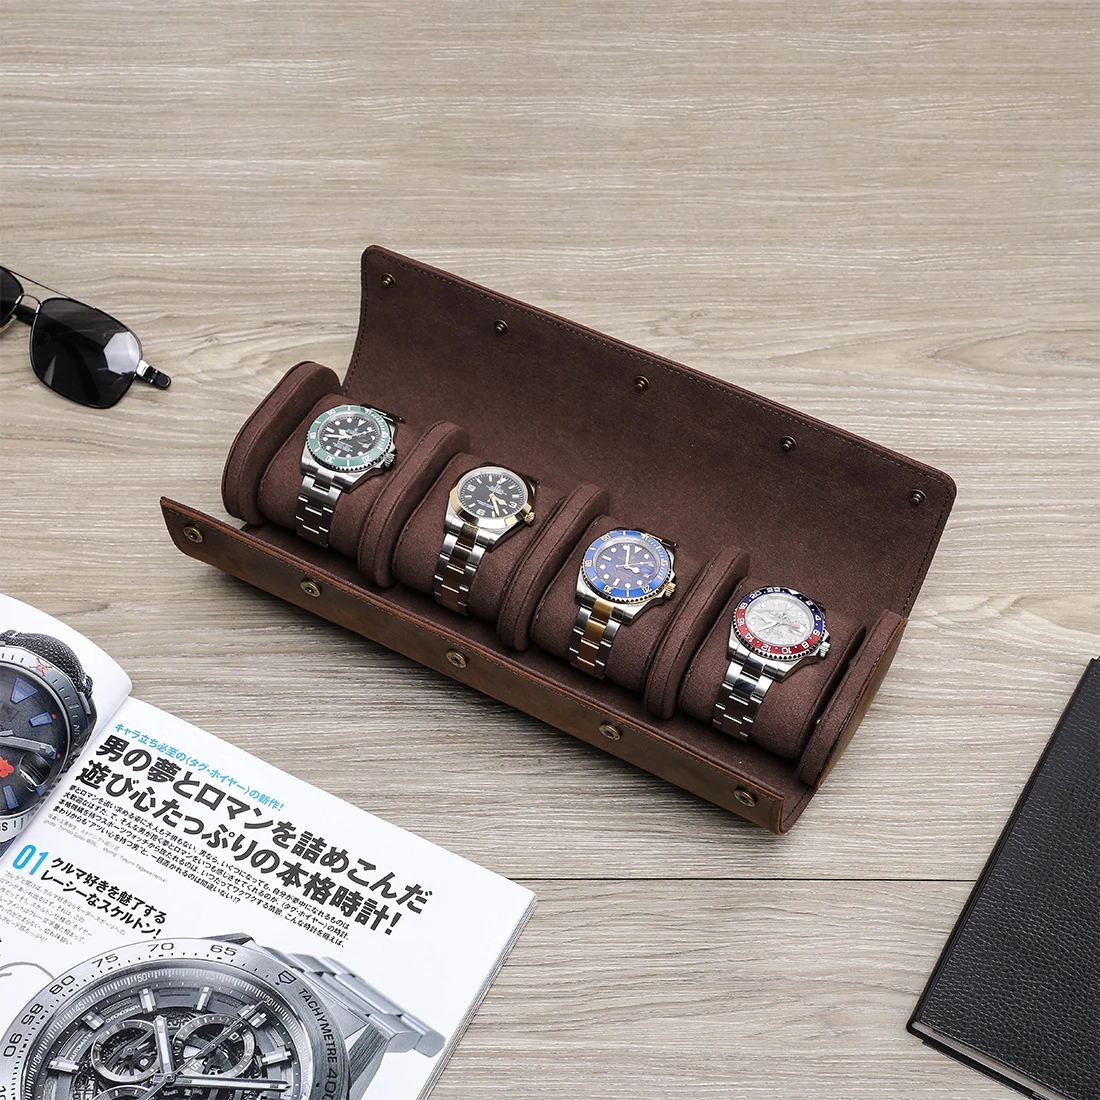 Luxury 4 Slots Watch Roll Travel Case Chic Vintage Genuine Leather Display Watch Storage Box with Slid in Out Watch Organizers